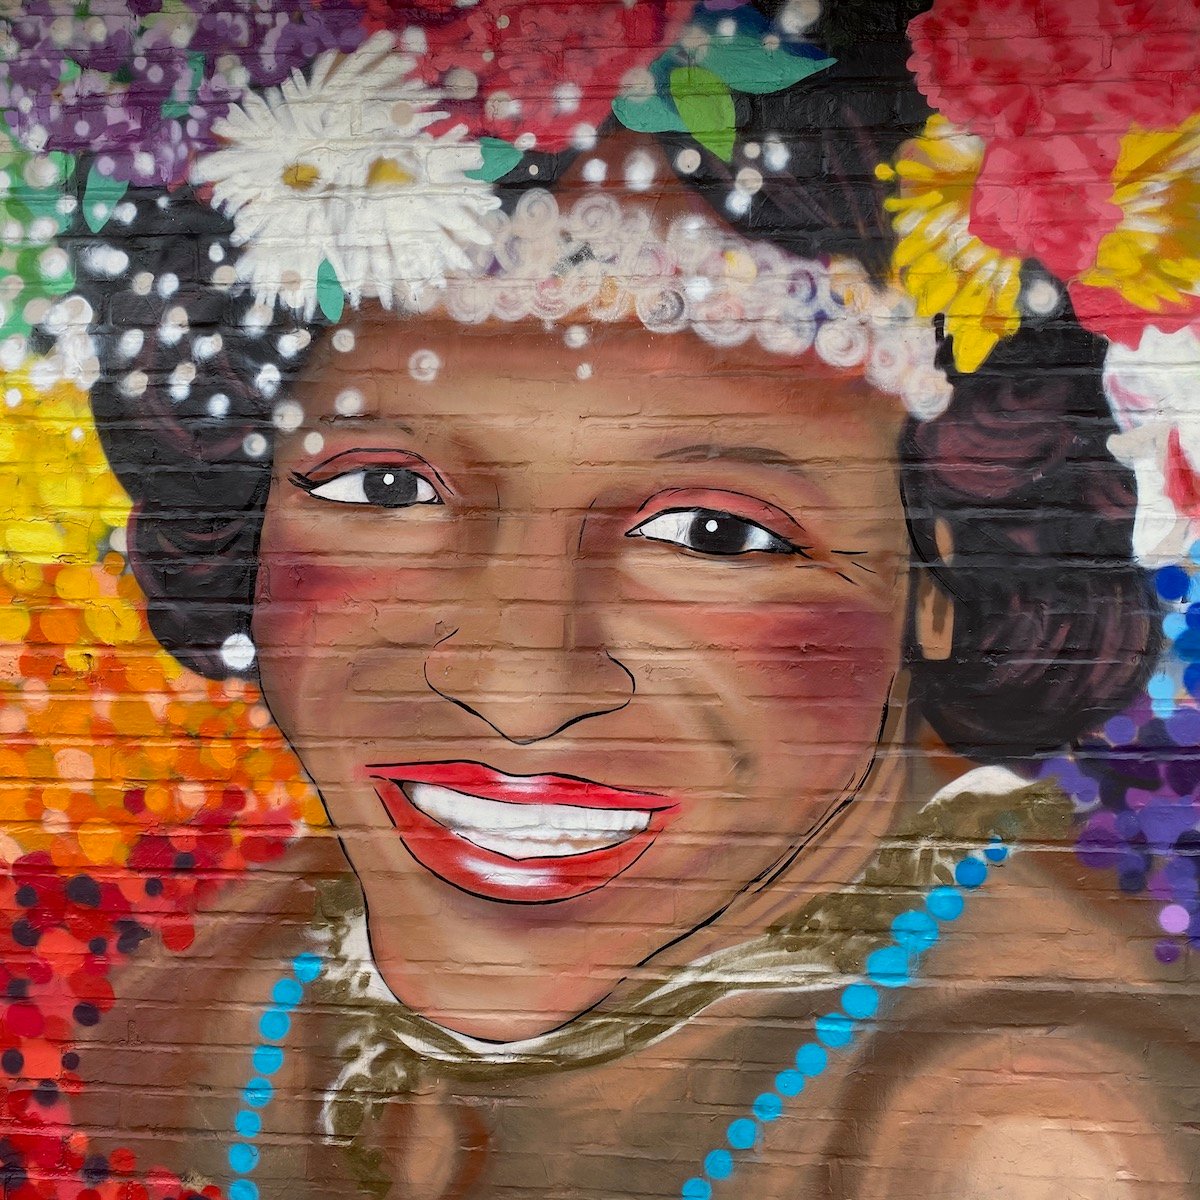 marsha johnson mural.jpeg - Travel and Golf Influencer - AmerExperience Content Curator